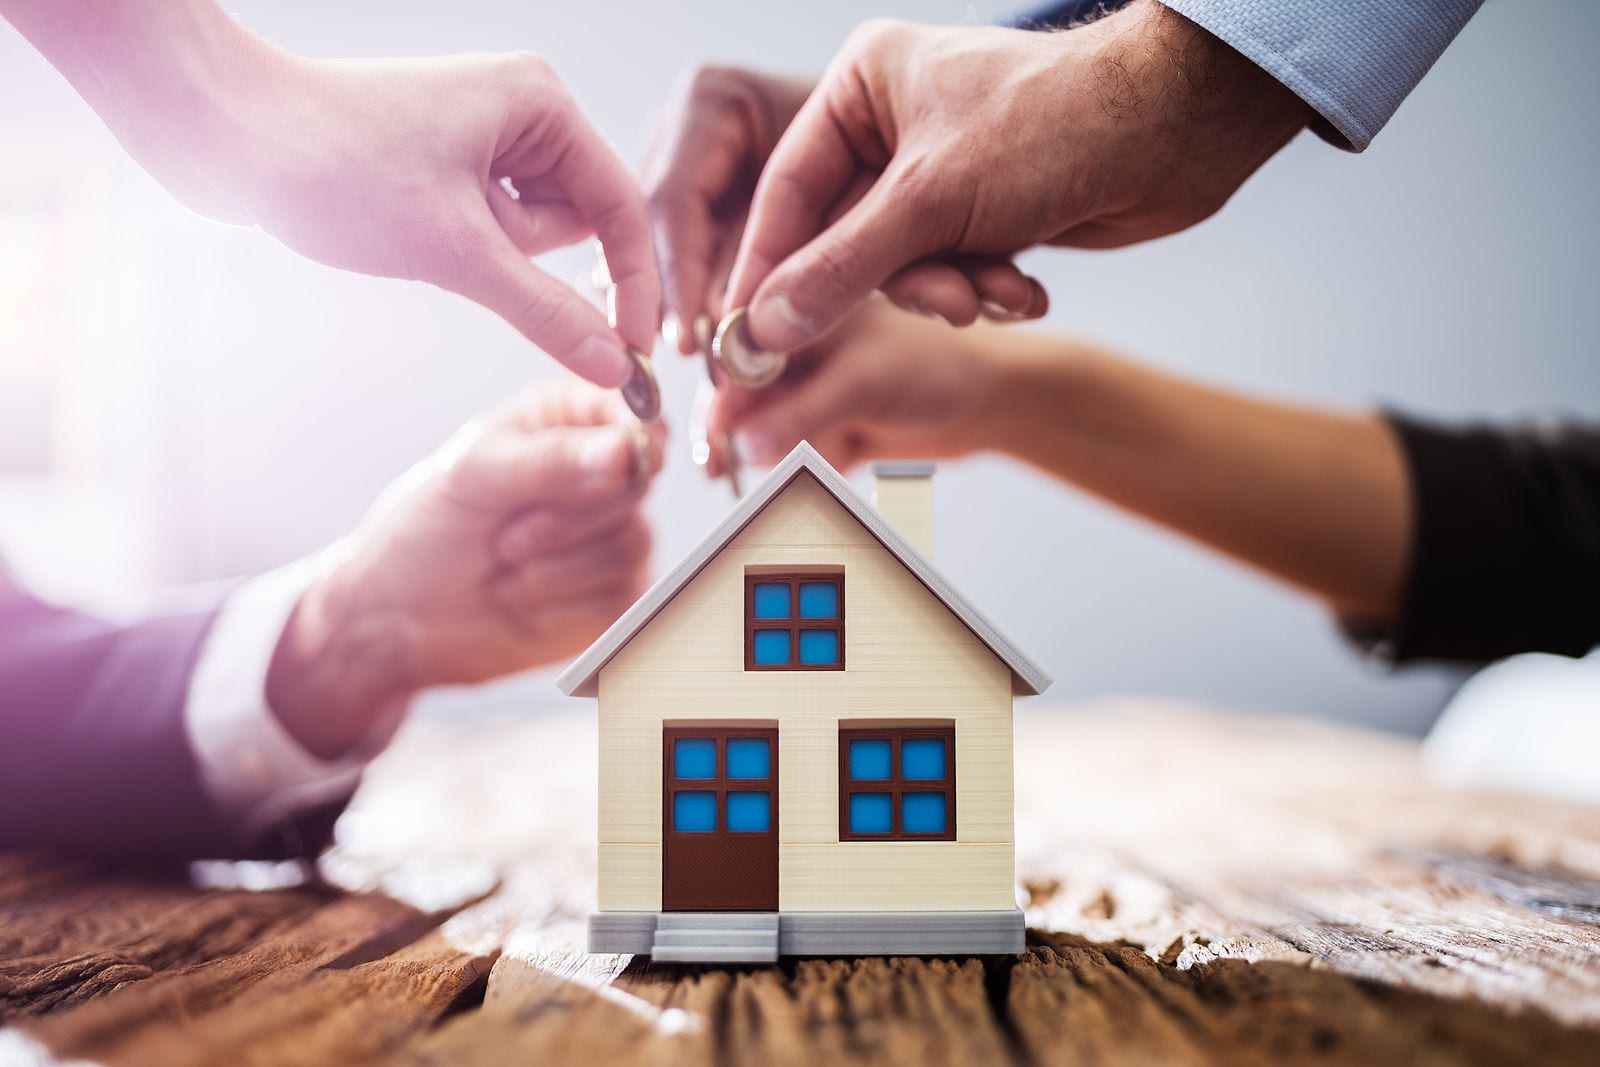 How to Set Up a Real Estate Partnership?